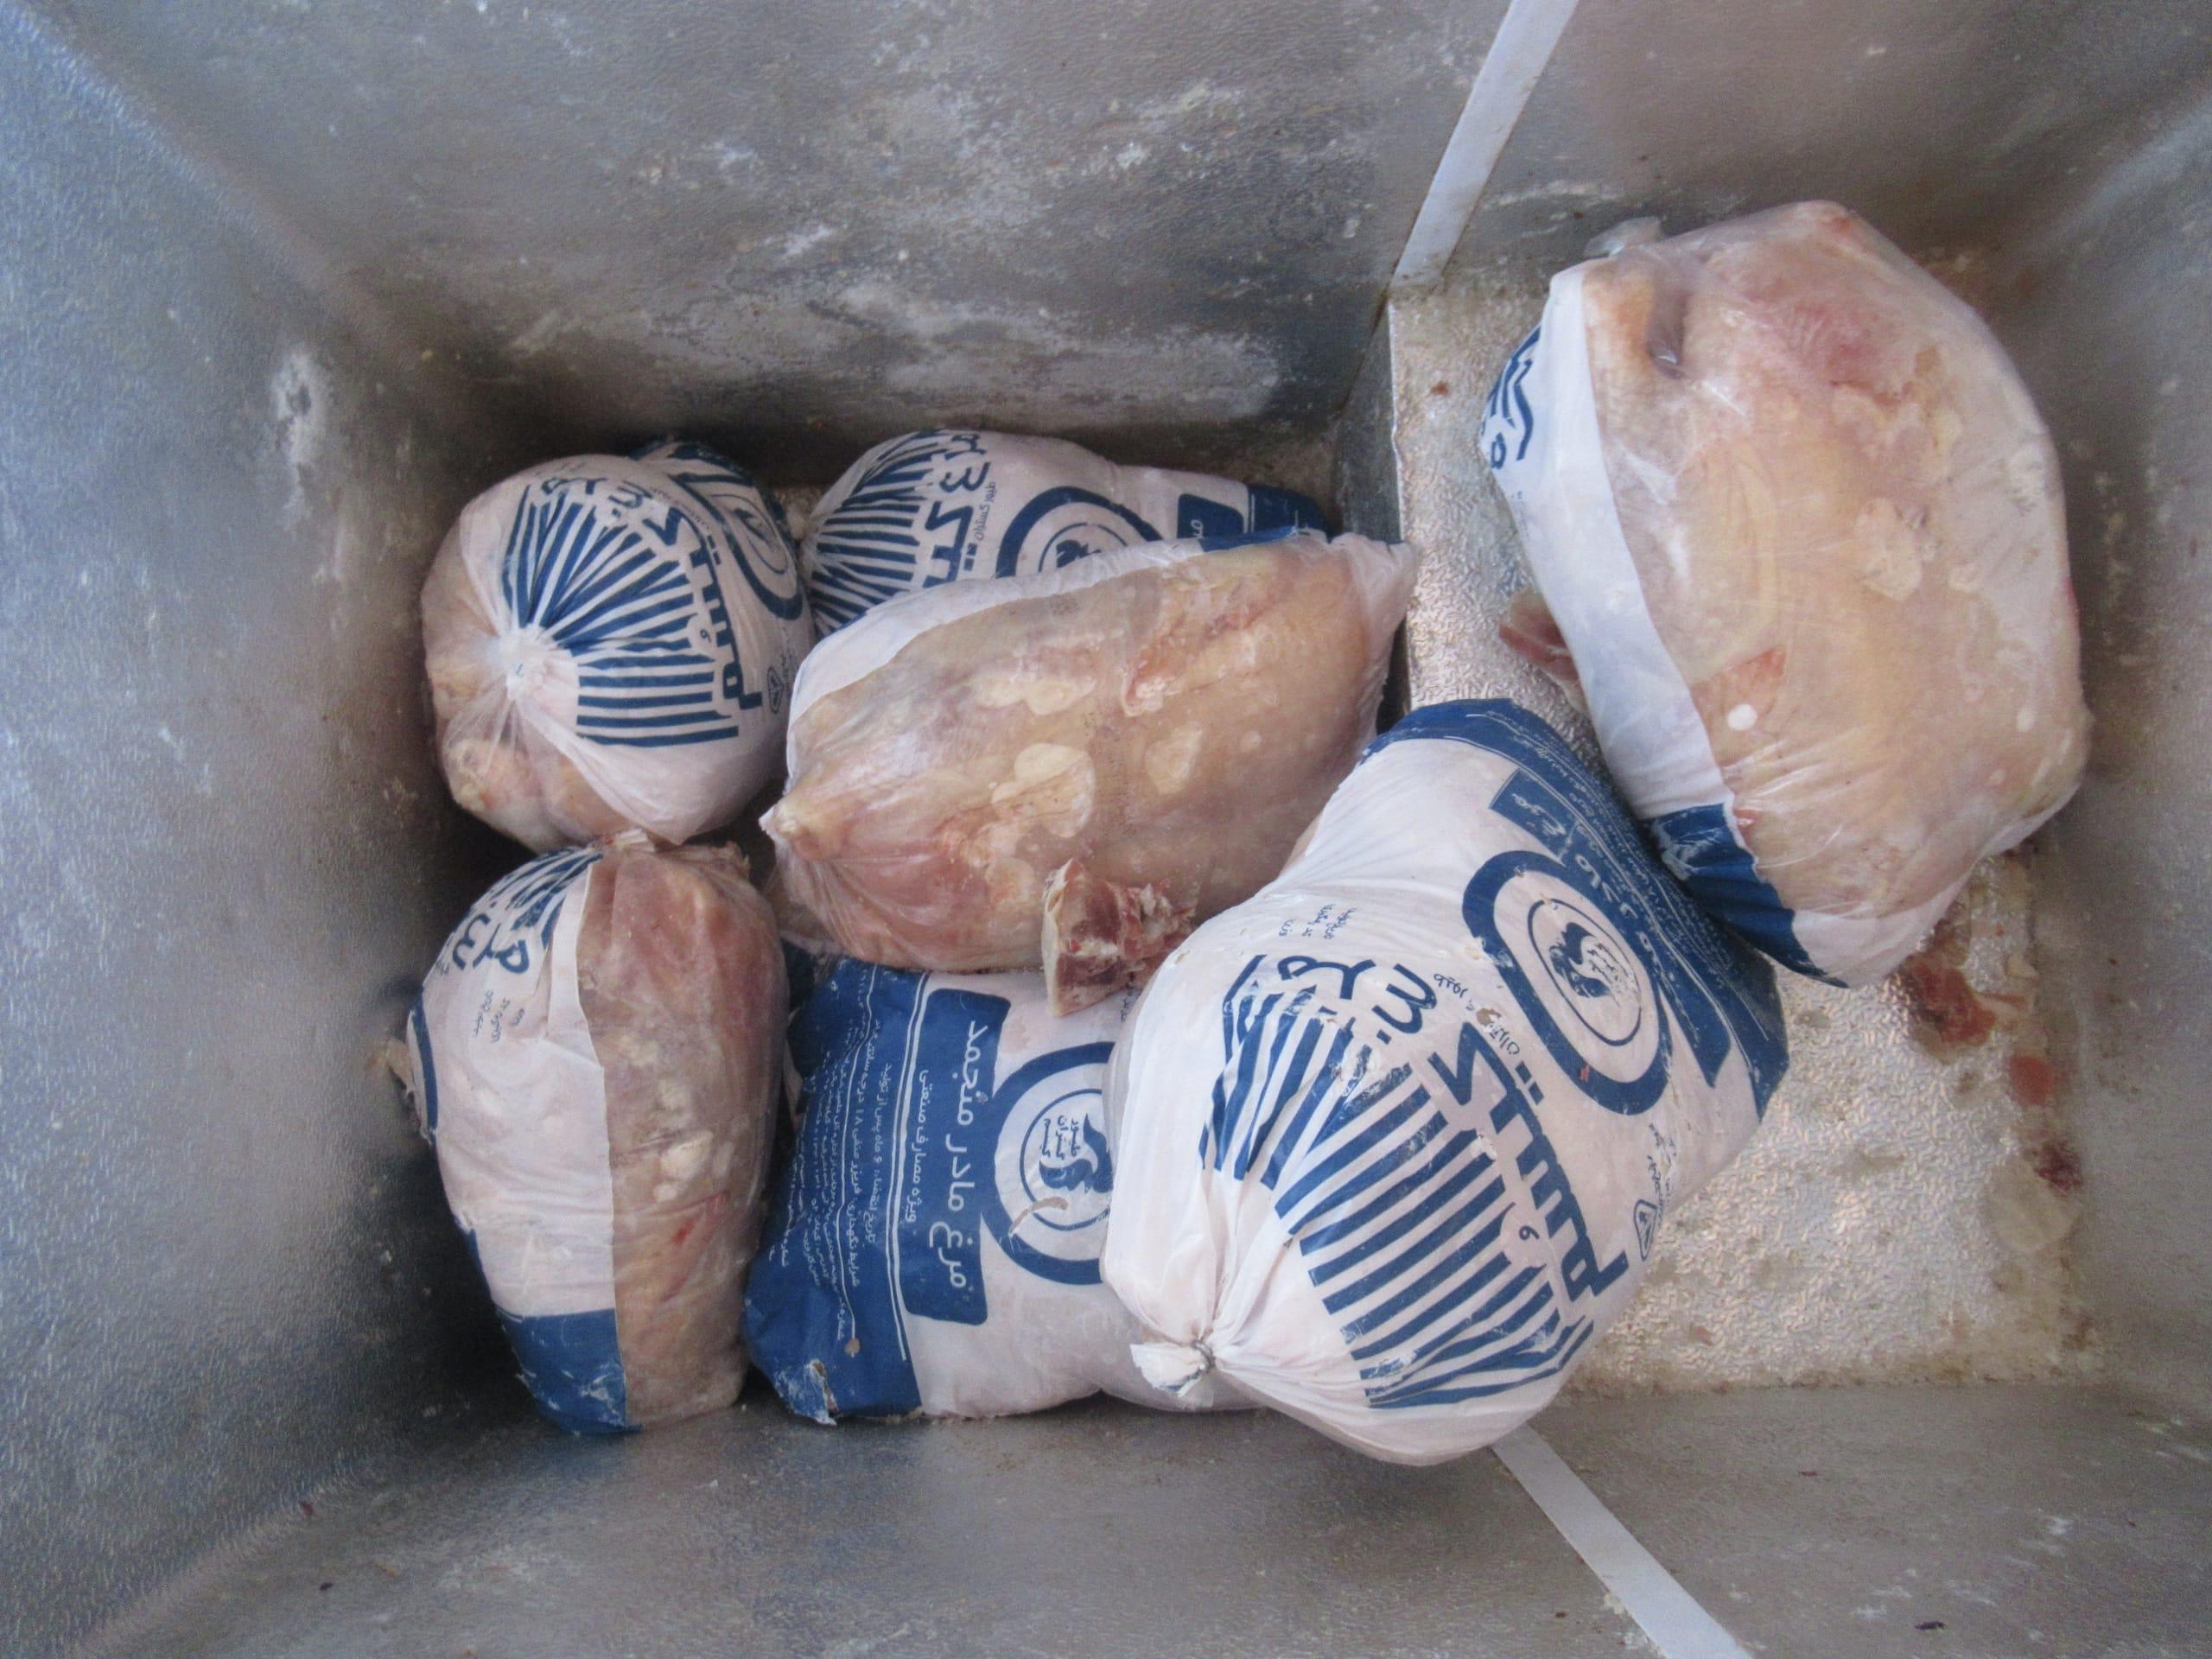 Properly packed, stored and frozen chicken meat. Like this, the quality of the product stays high and the expiry date is extended drastically.